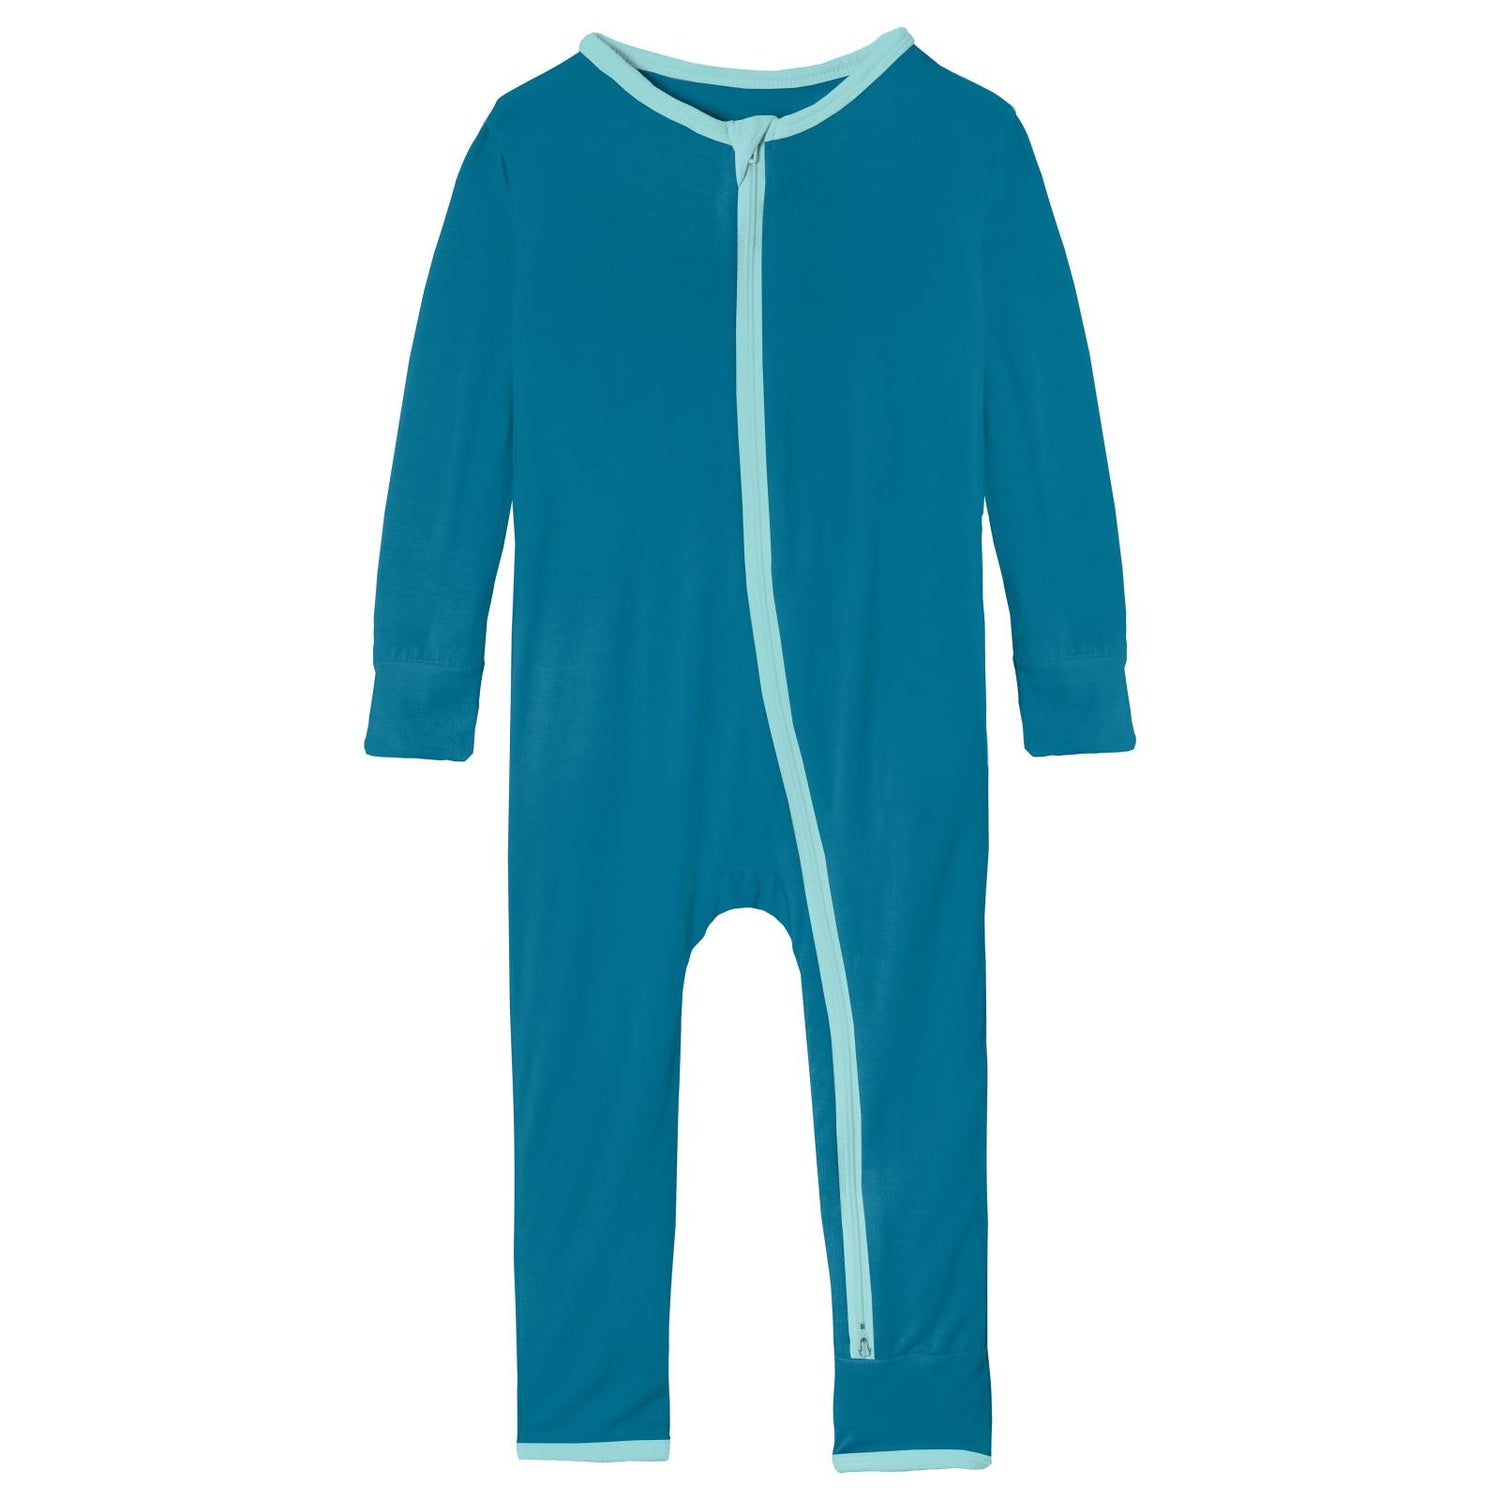 Coverall with 2 Way Zipper in Cerulean Blue with Summer Sky